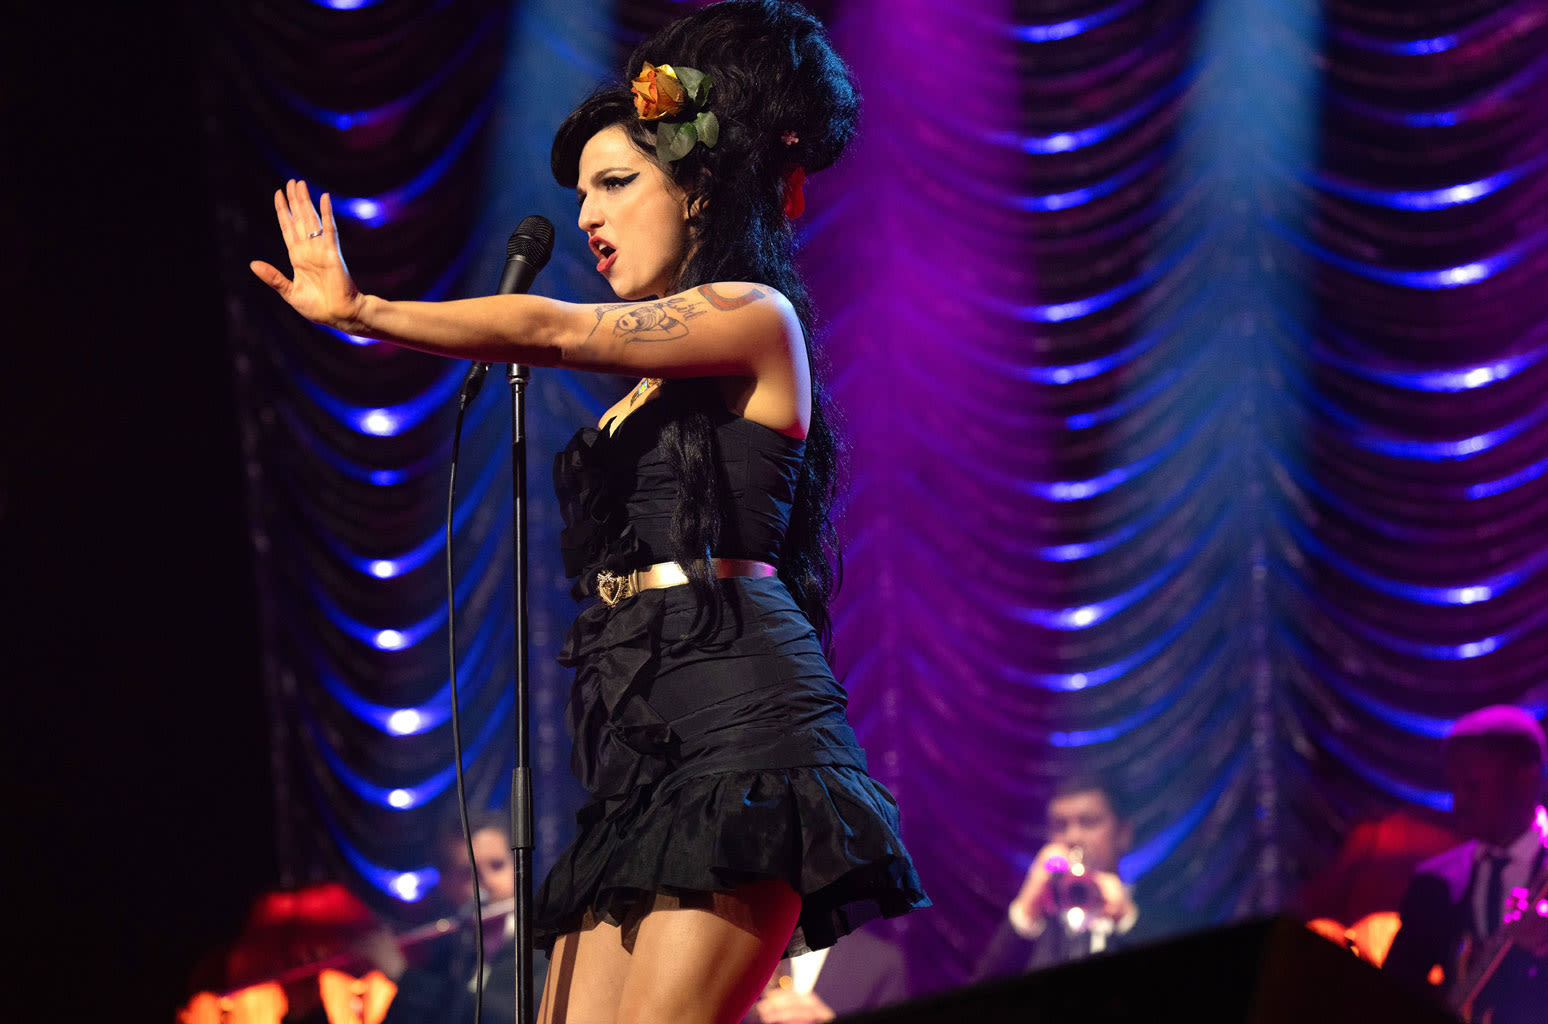 ‘Back to Black’ Music Supervisor Iain Cooke Opens Up About Capturing Amy Winehouse’s Musical Essence: ‘She’s a Classic Forevermore’